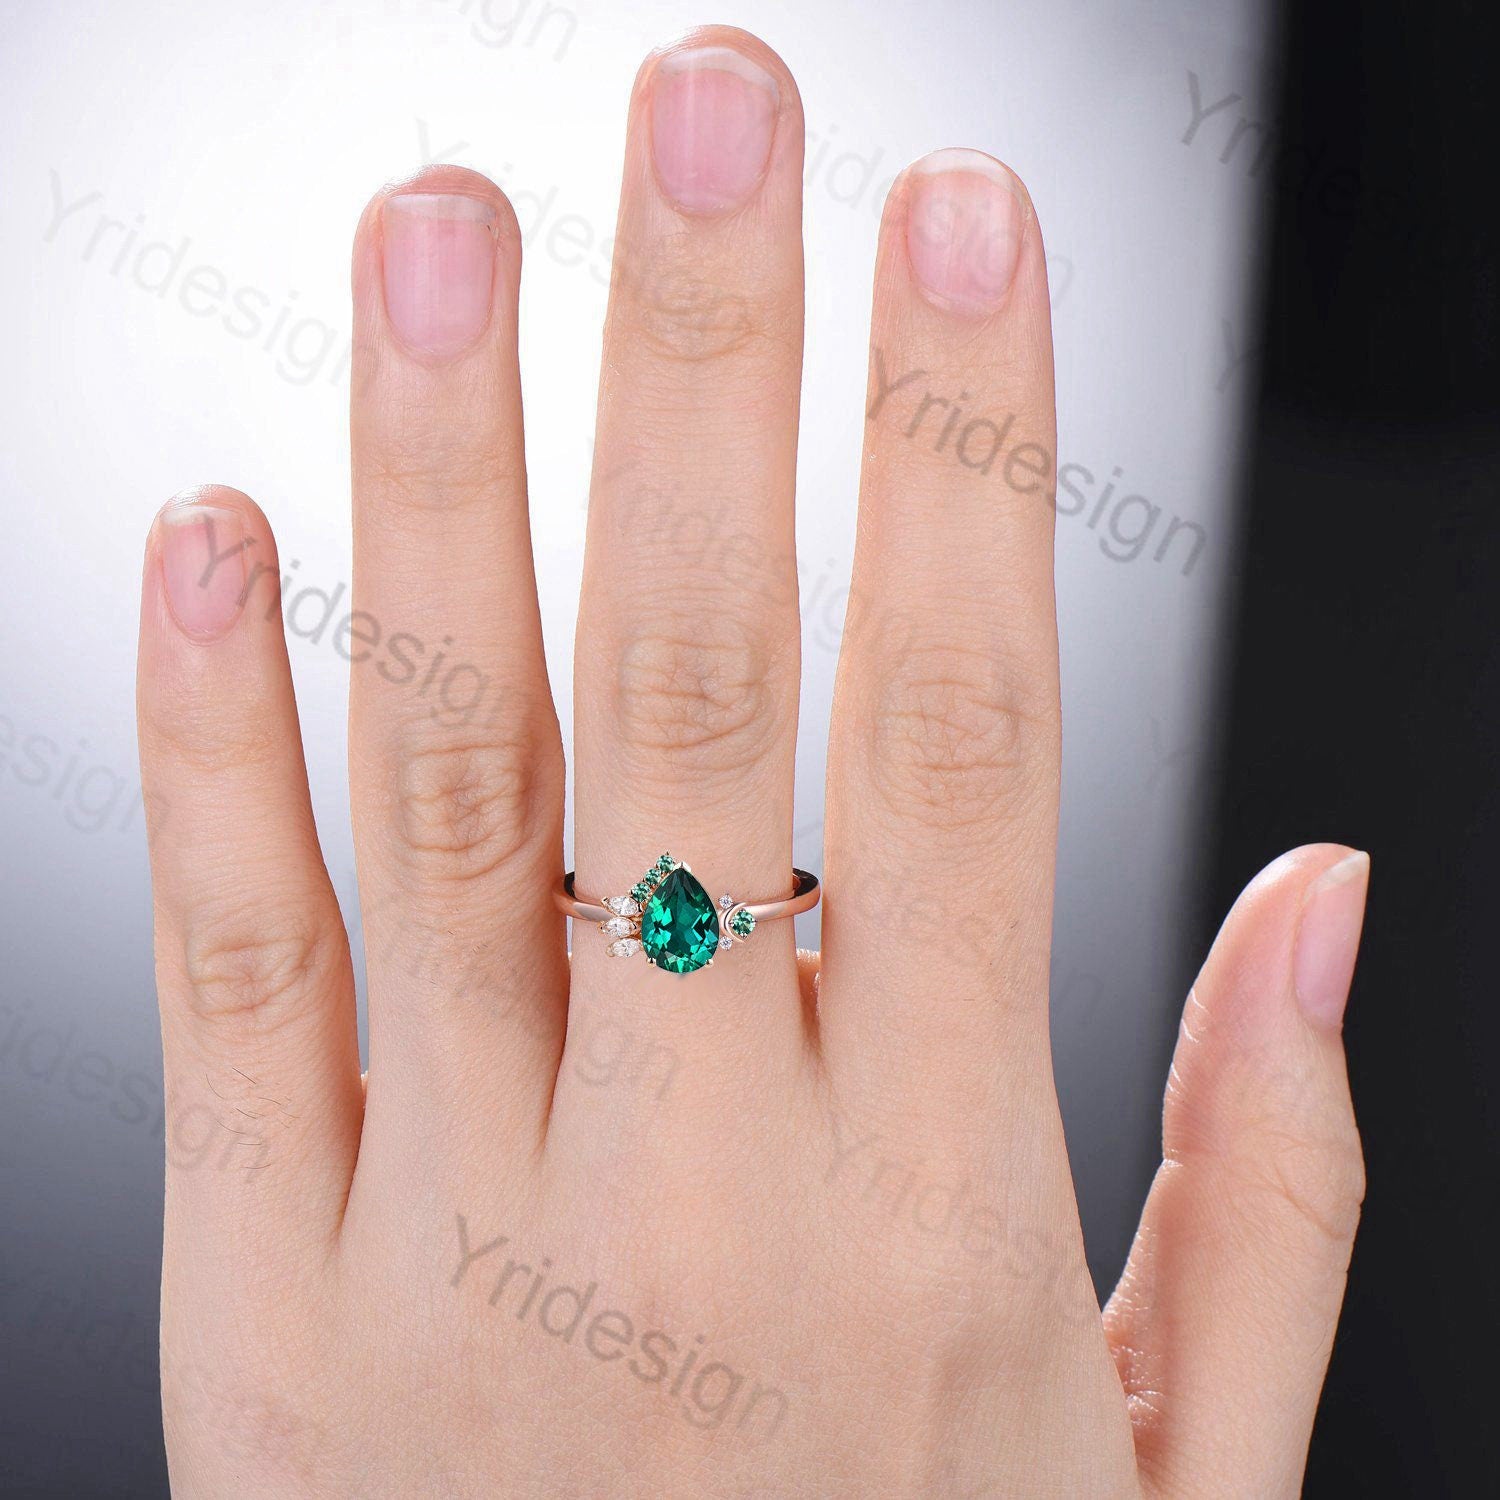 Unique Pear Shaped Emerald Engagement Ring Vintage Green Crystal Wedding Ring Art Deco Cluster Moon Anniversary Ring Proposal Gift for Women - PENFINE